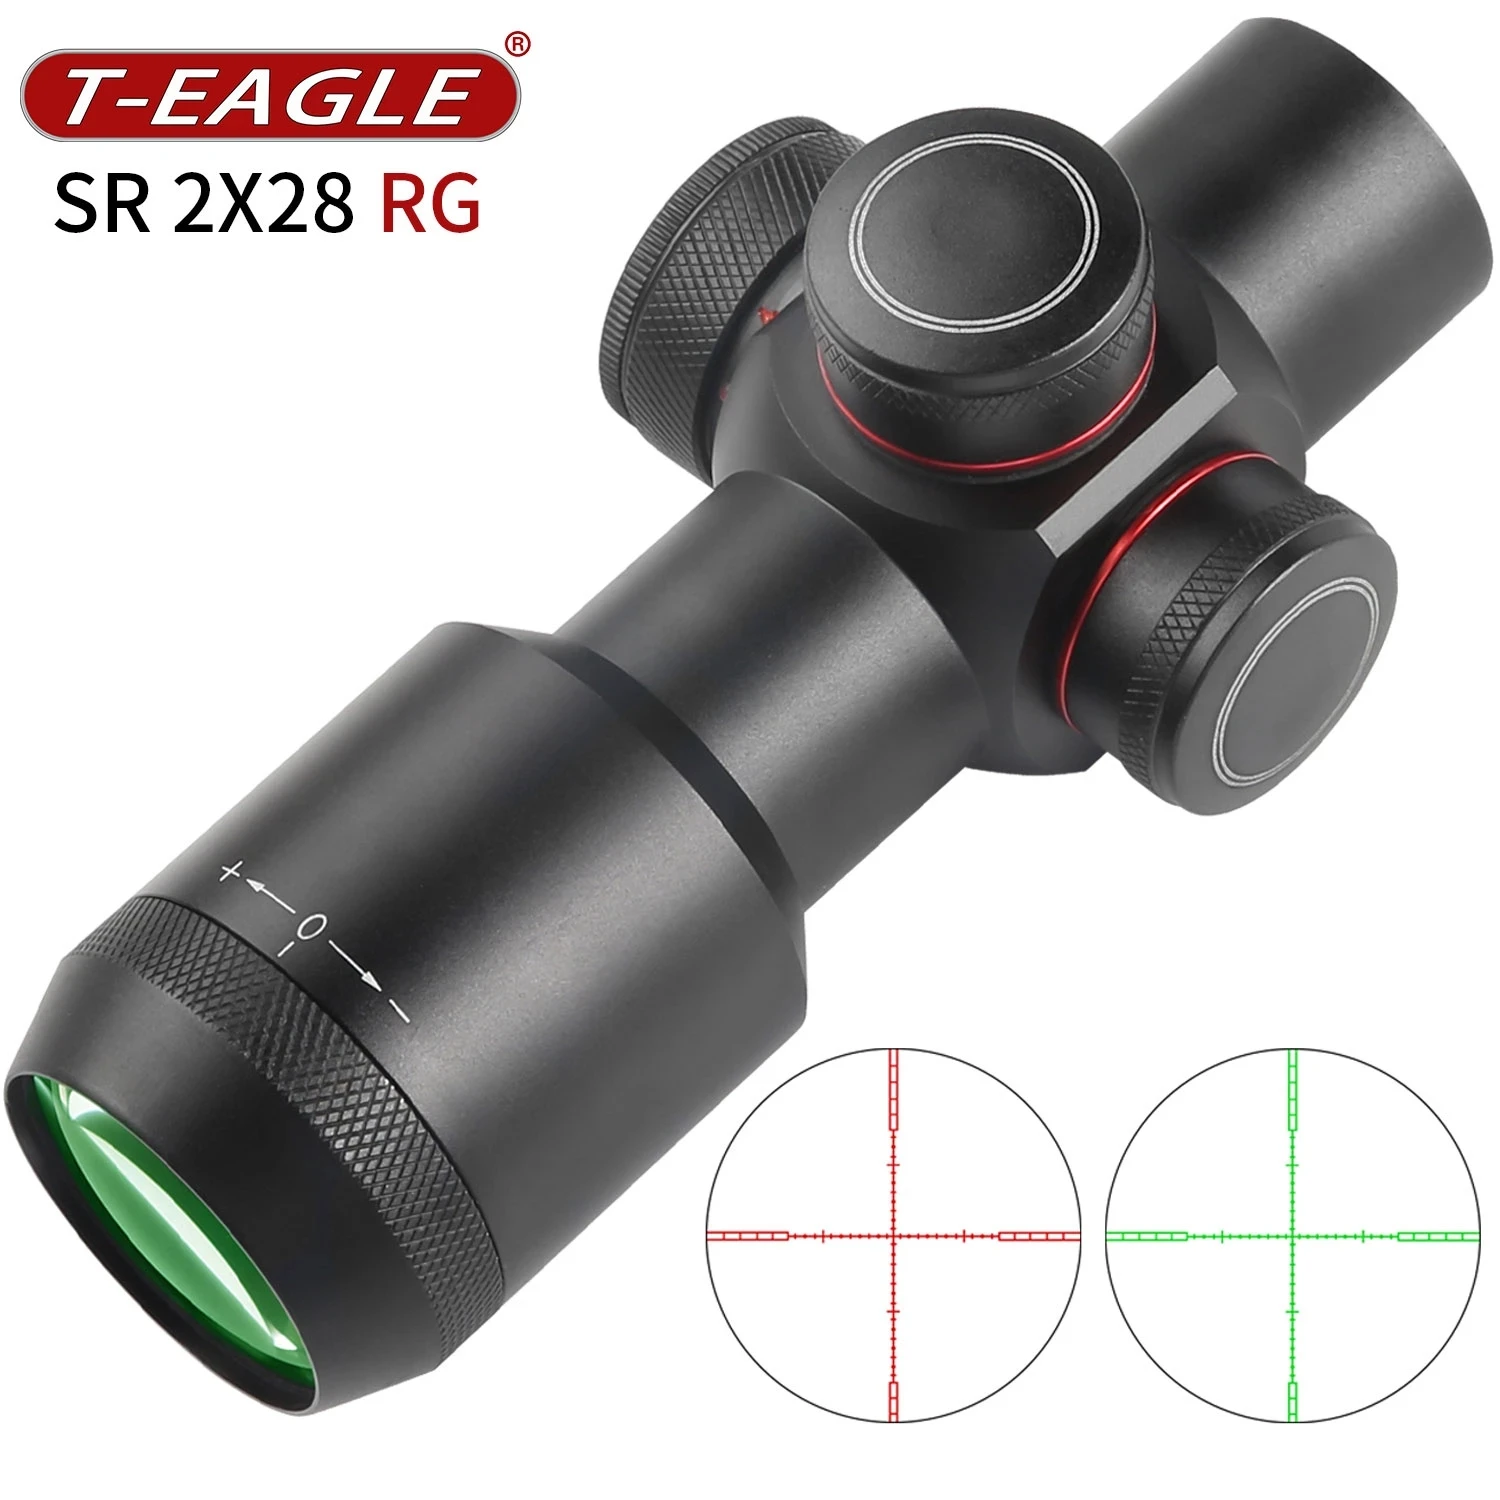 

T-EAGLE SR 2X28 Tactical Rifle Scope Red Green Reticle Airsoft Riflescope Outdoor Sport Hunting Optics Shooting Glock Gun Sight